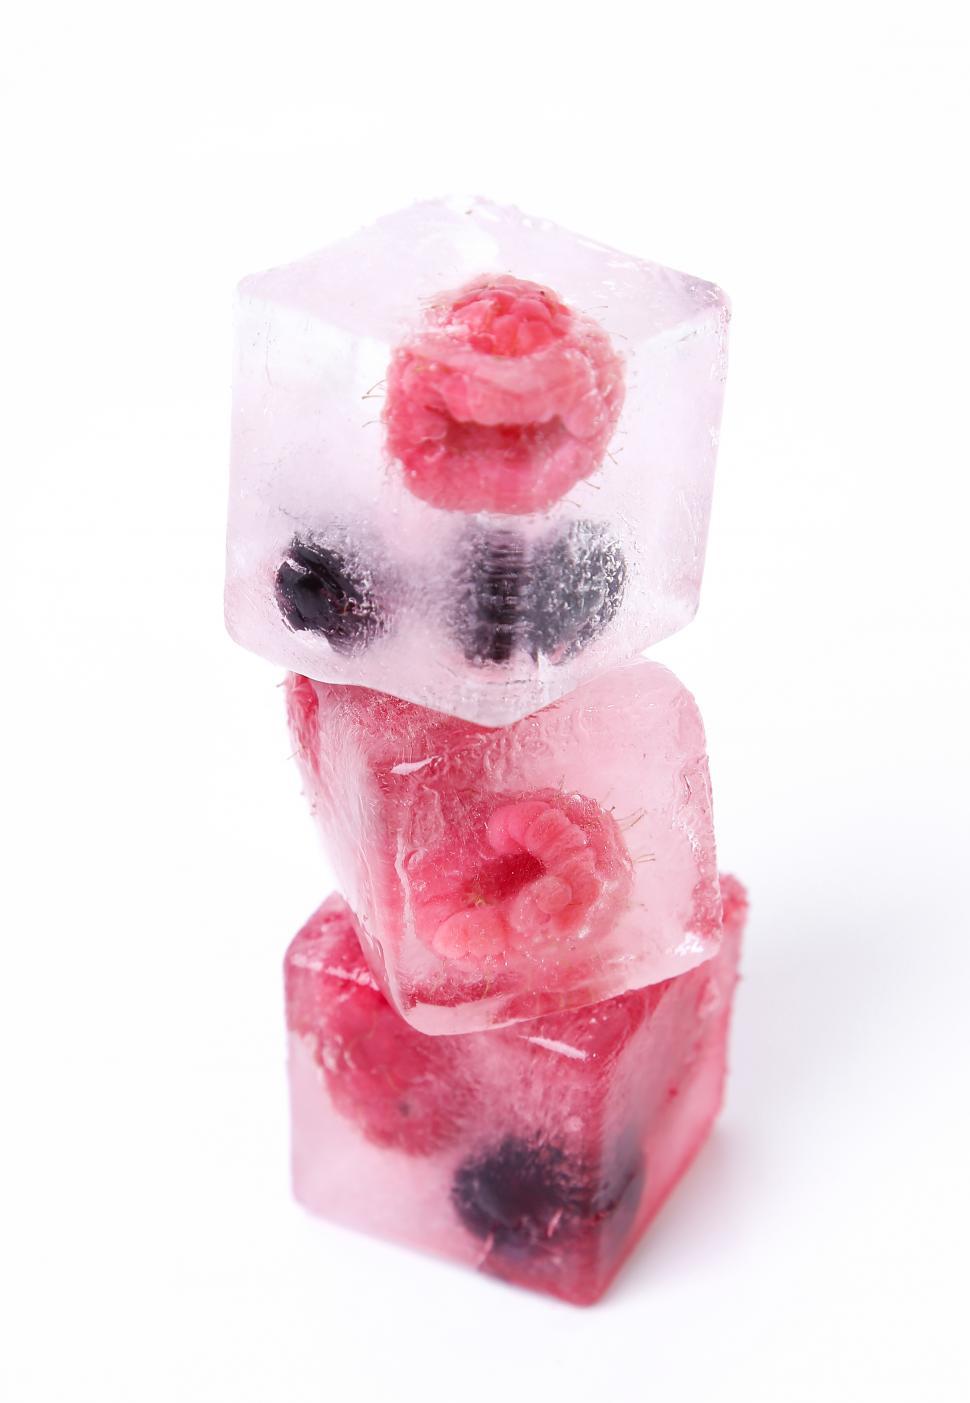 Free Image of Frozen berries in a stack of ice cubes 